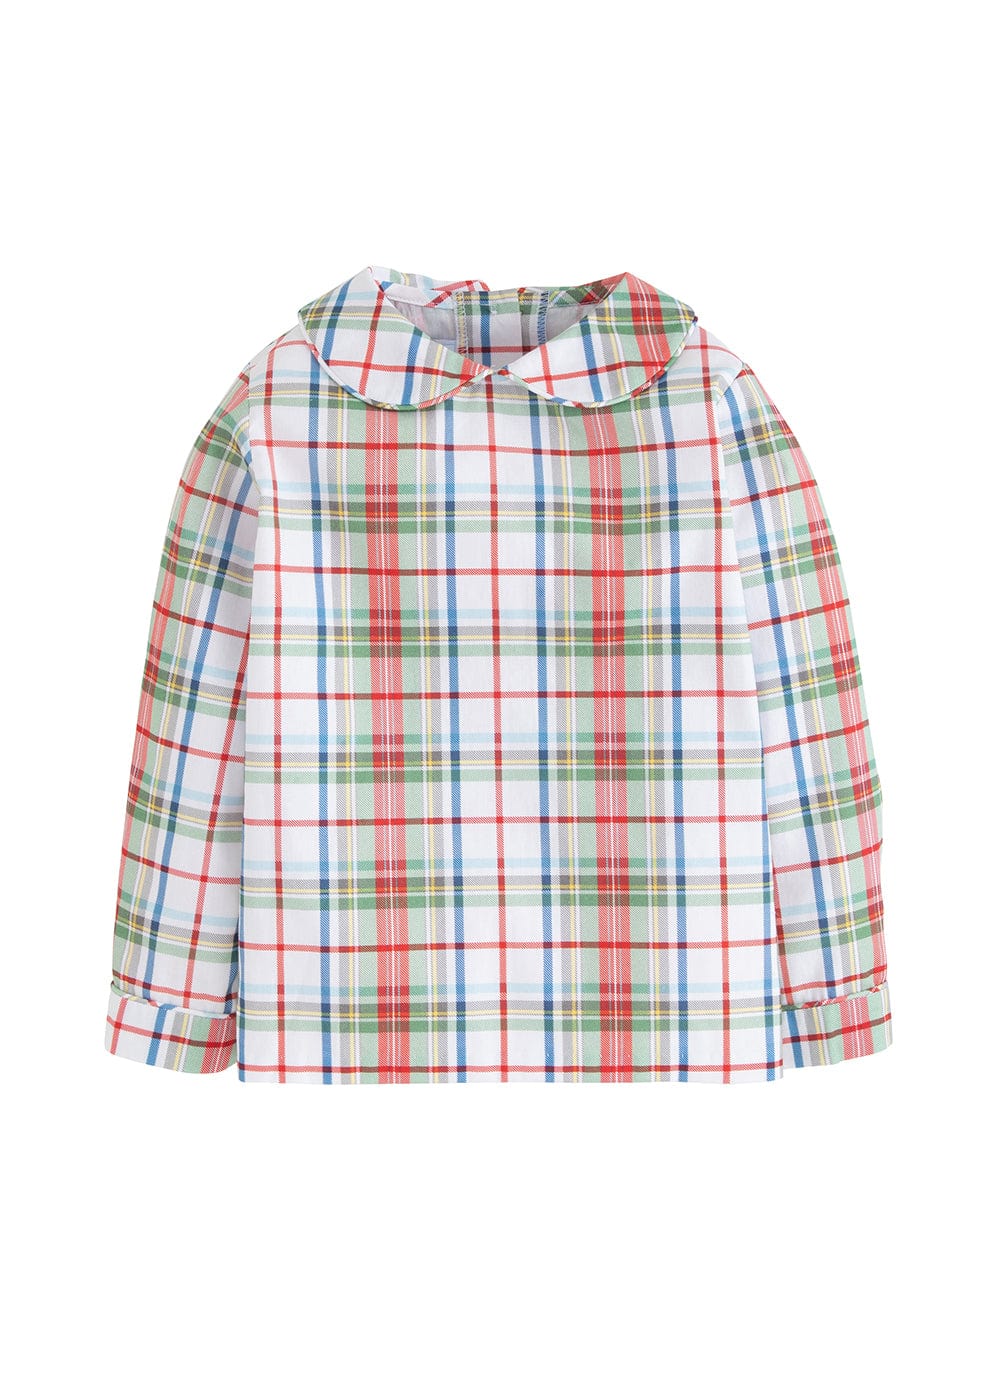 classic childrens clothing boys shirt in green and red plaid with peter pan collar